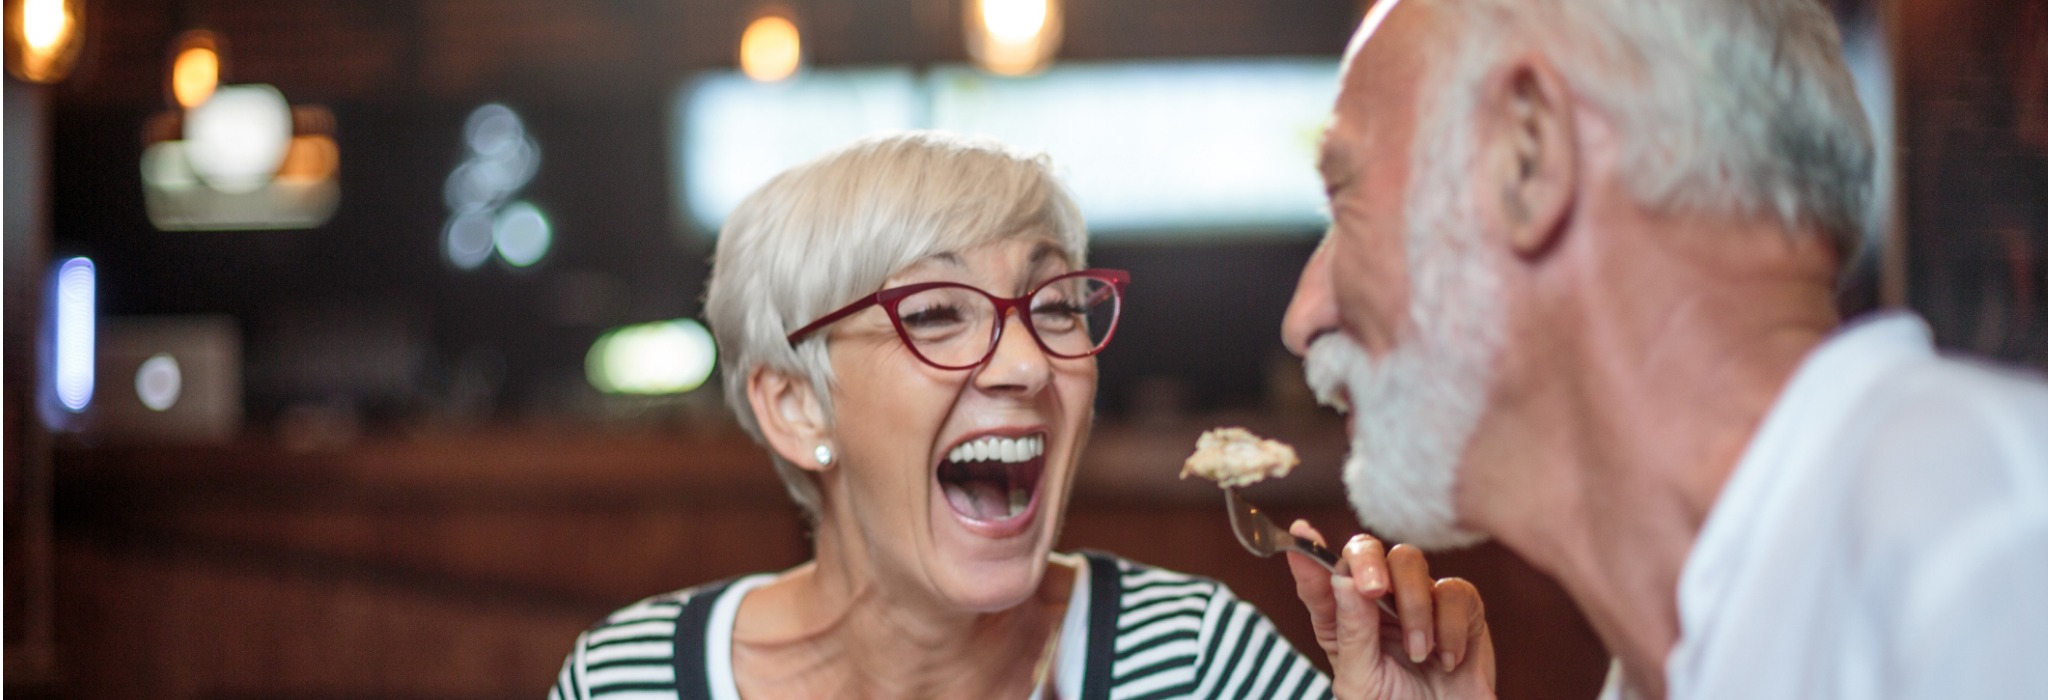 older woman wearing red framed glasses feeding her male partner a bite of food in a restaurant 2048x800